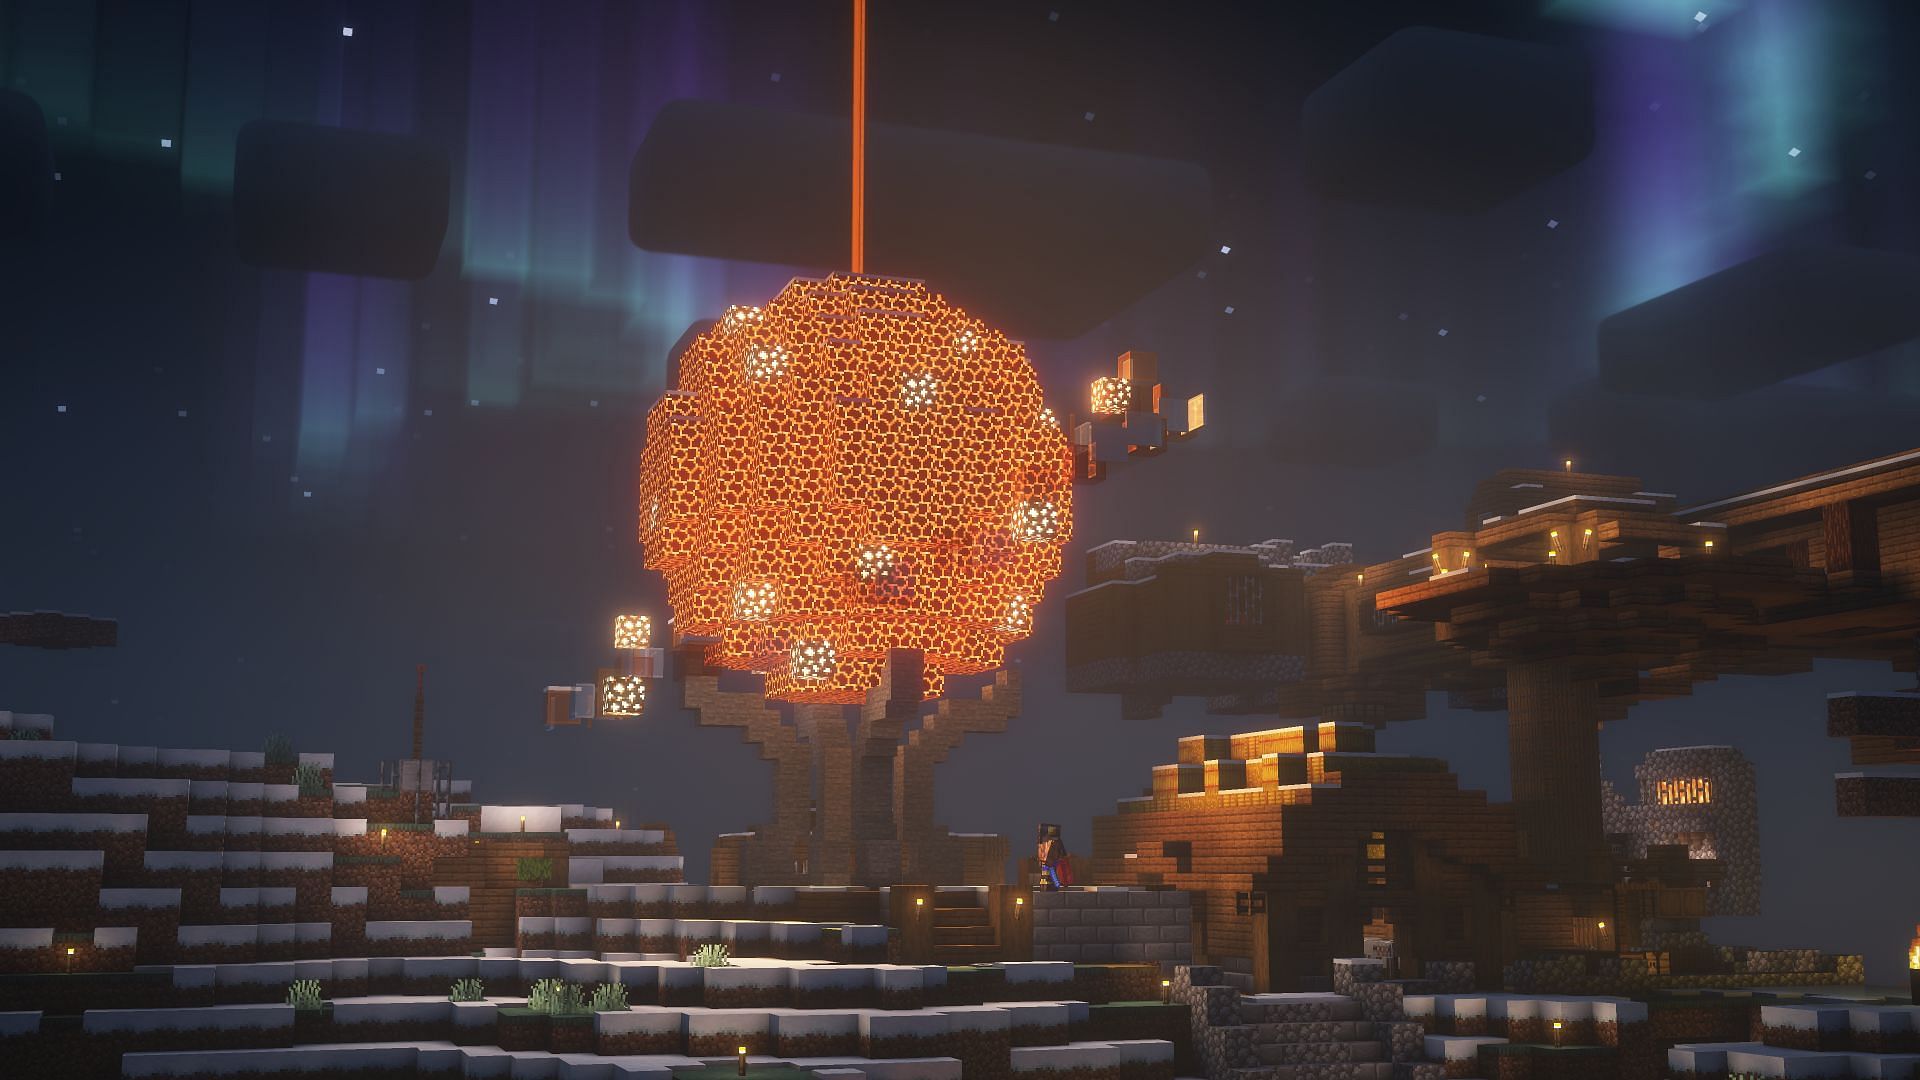 This spherical beacon design could be tricky to build in Minecraft (Image via Impressive_Caramel97/Reddit)